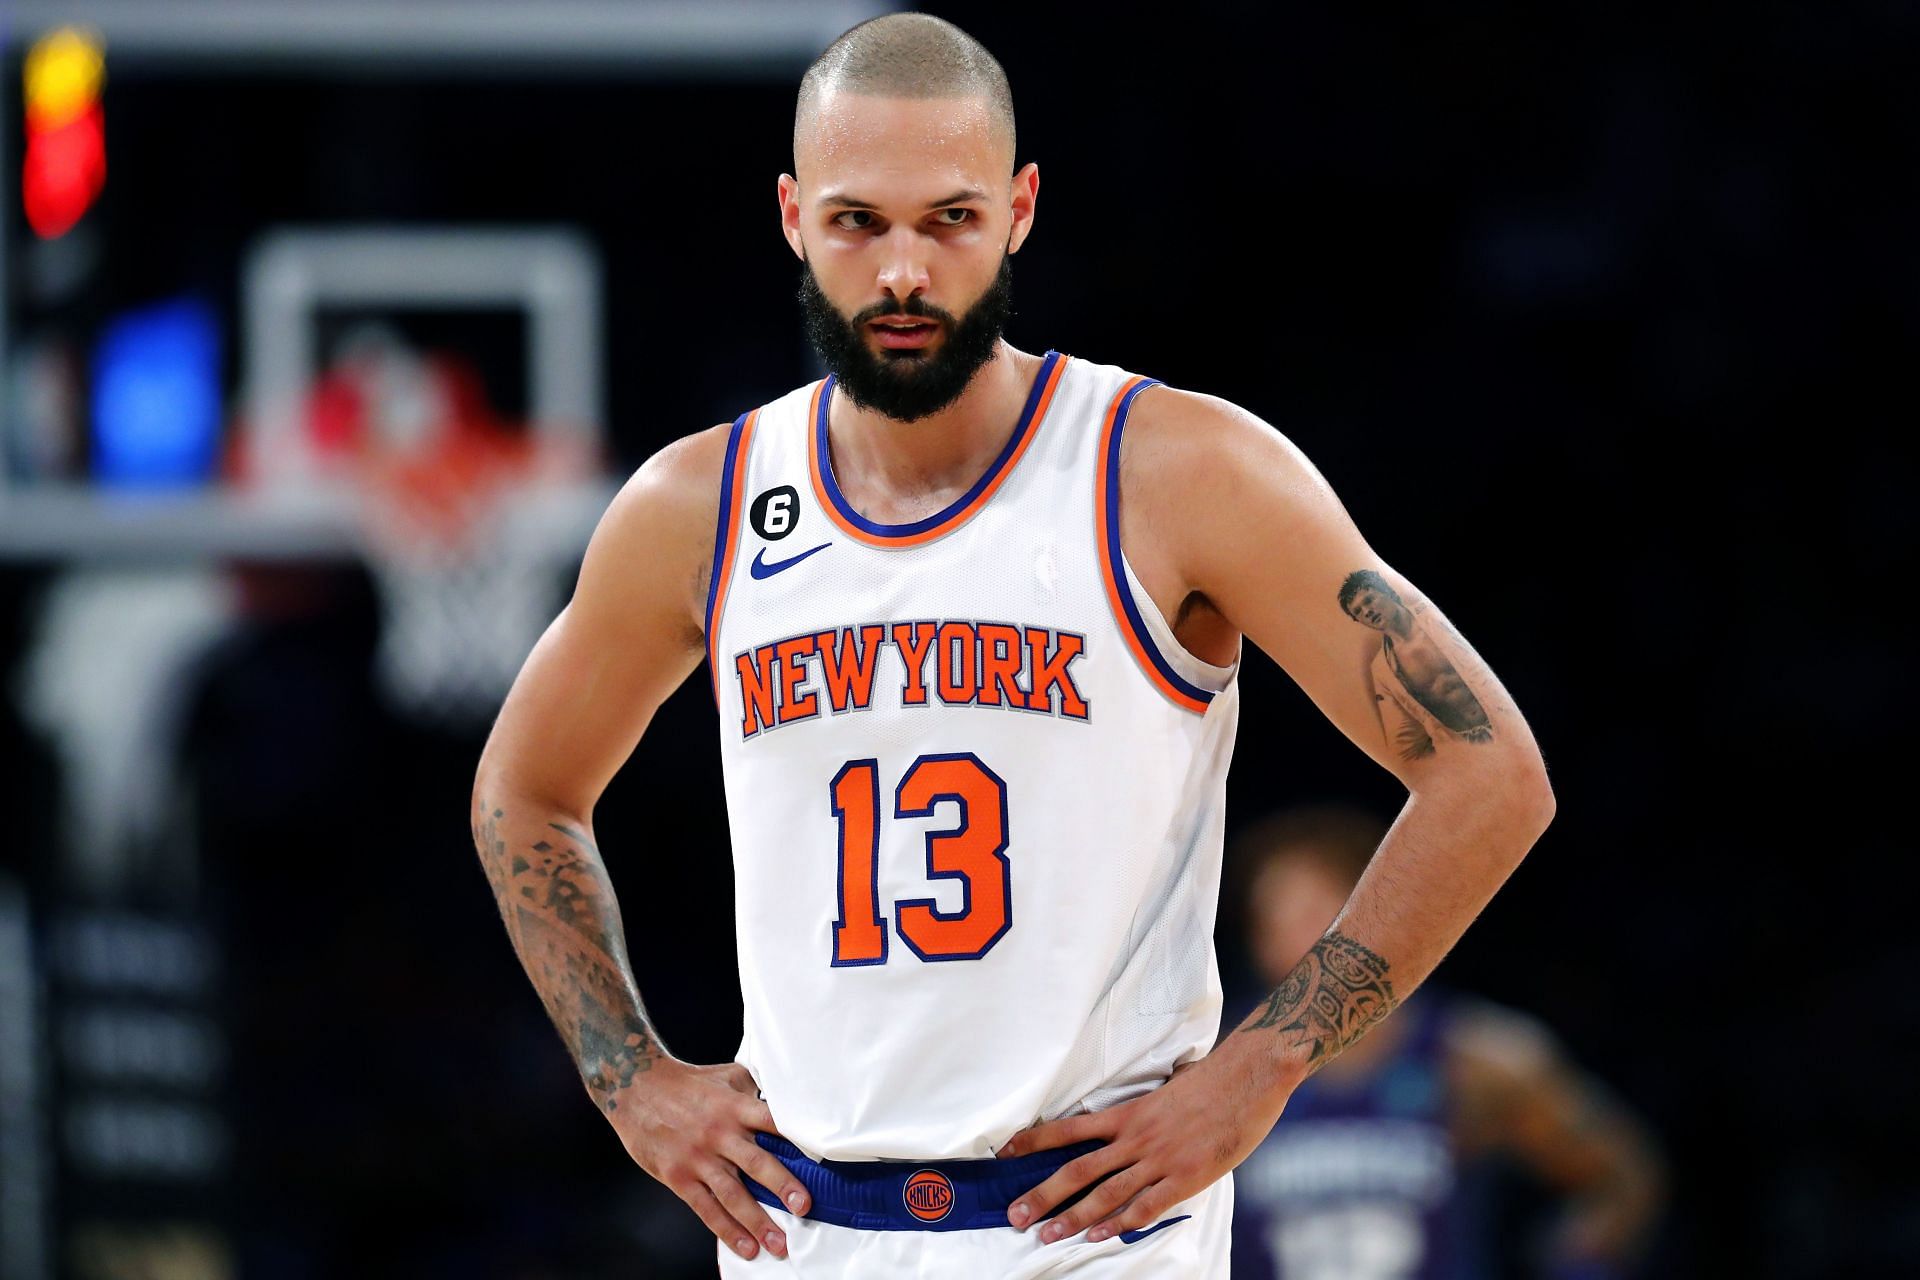 Evan Fournier has faced challenges in securing consistent playing time.